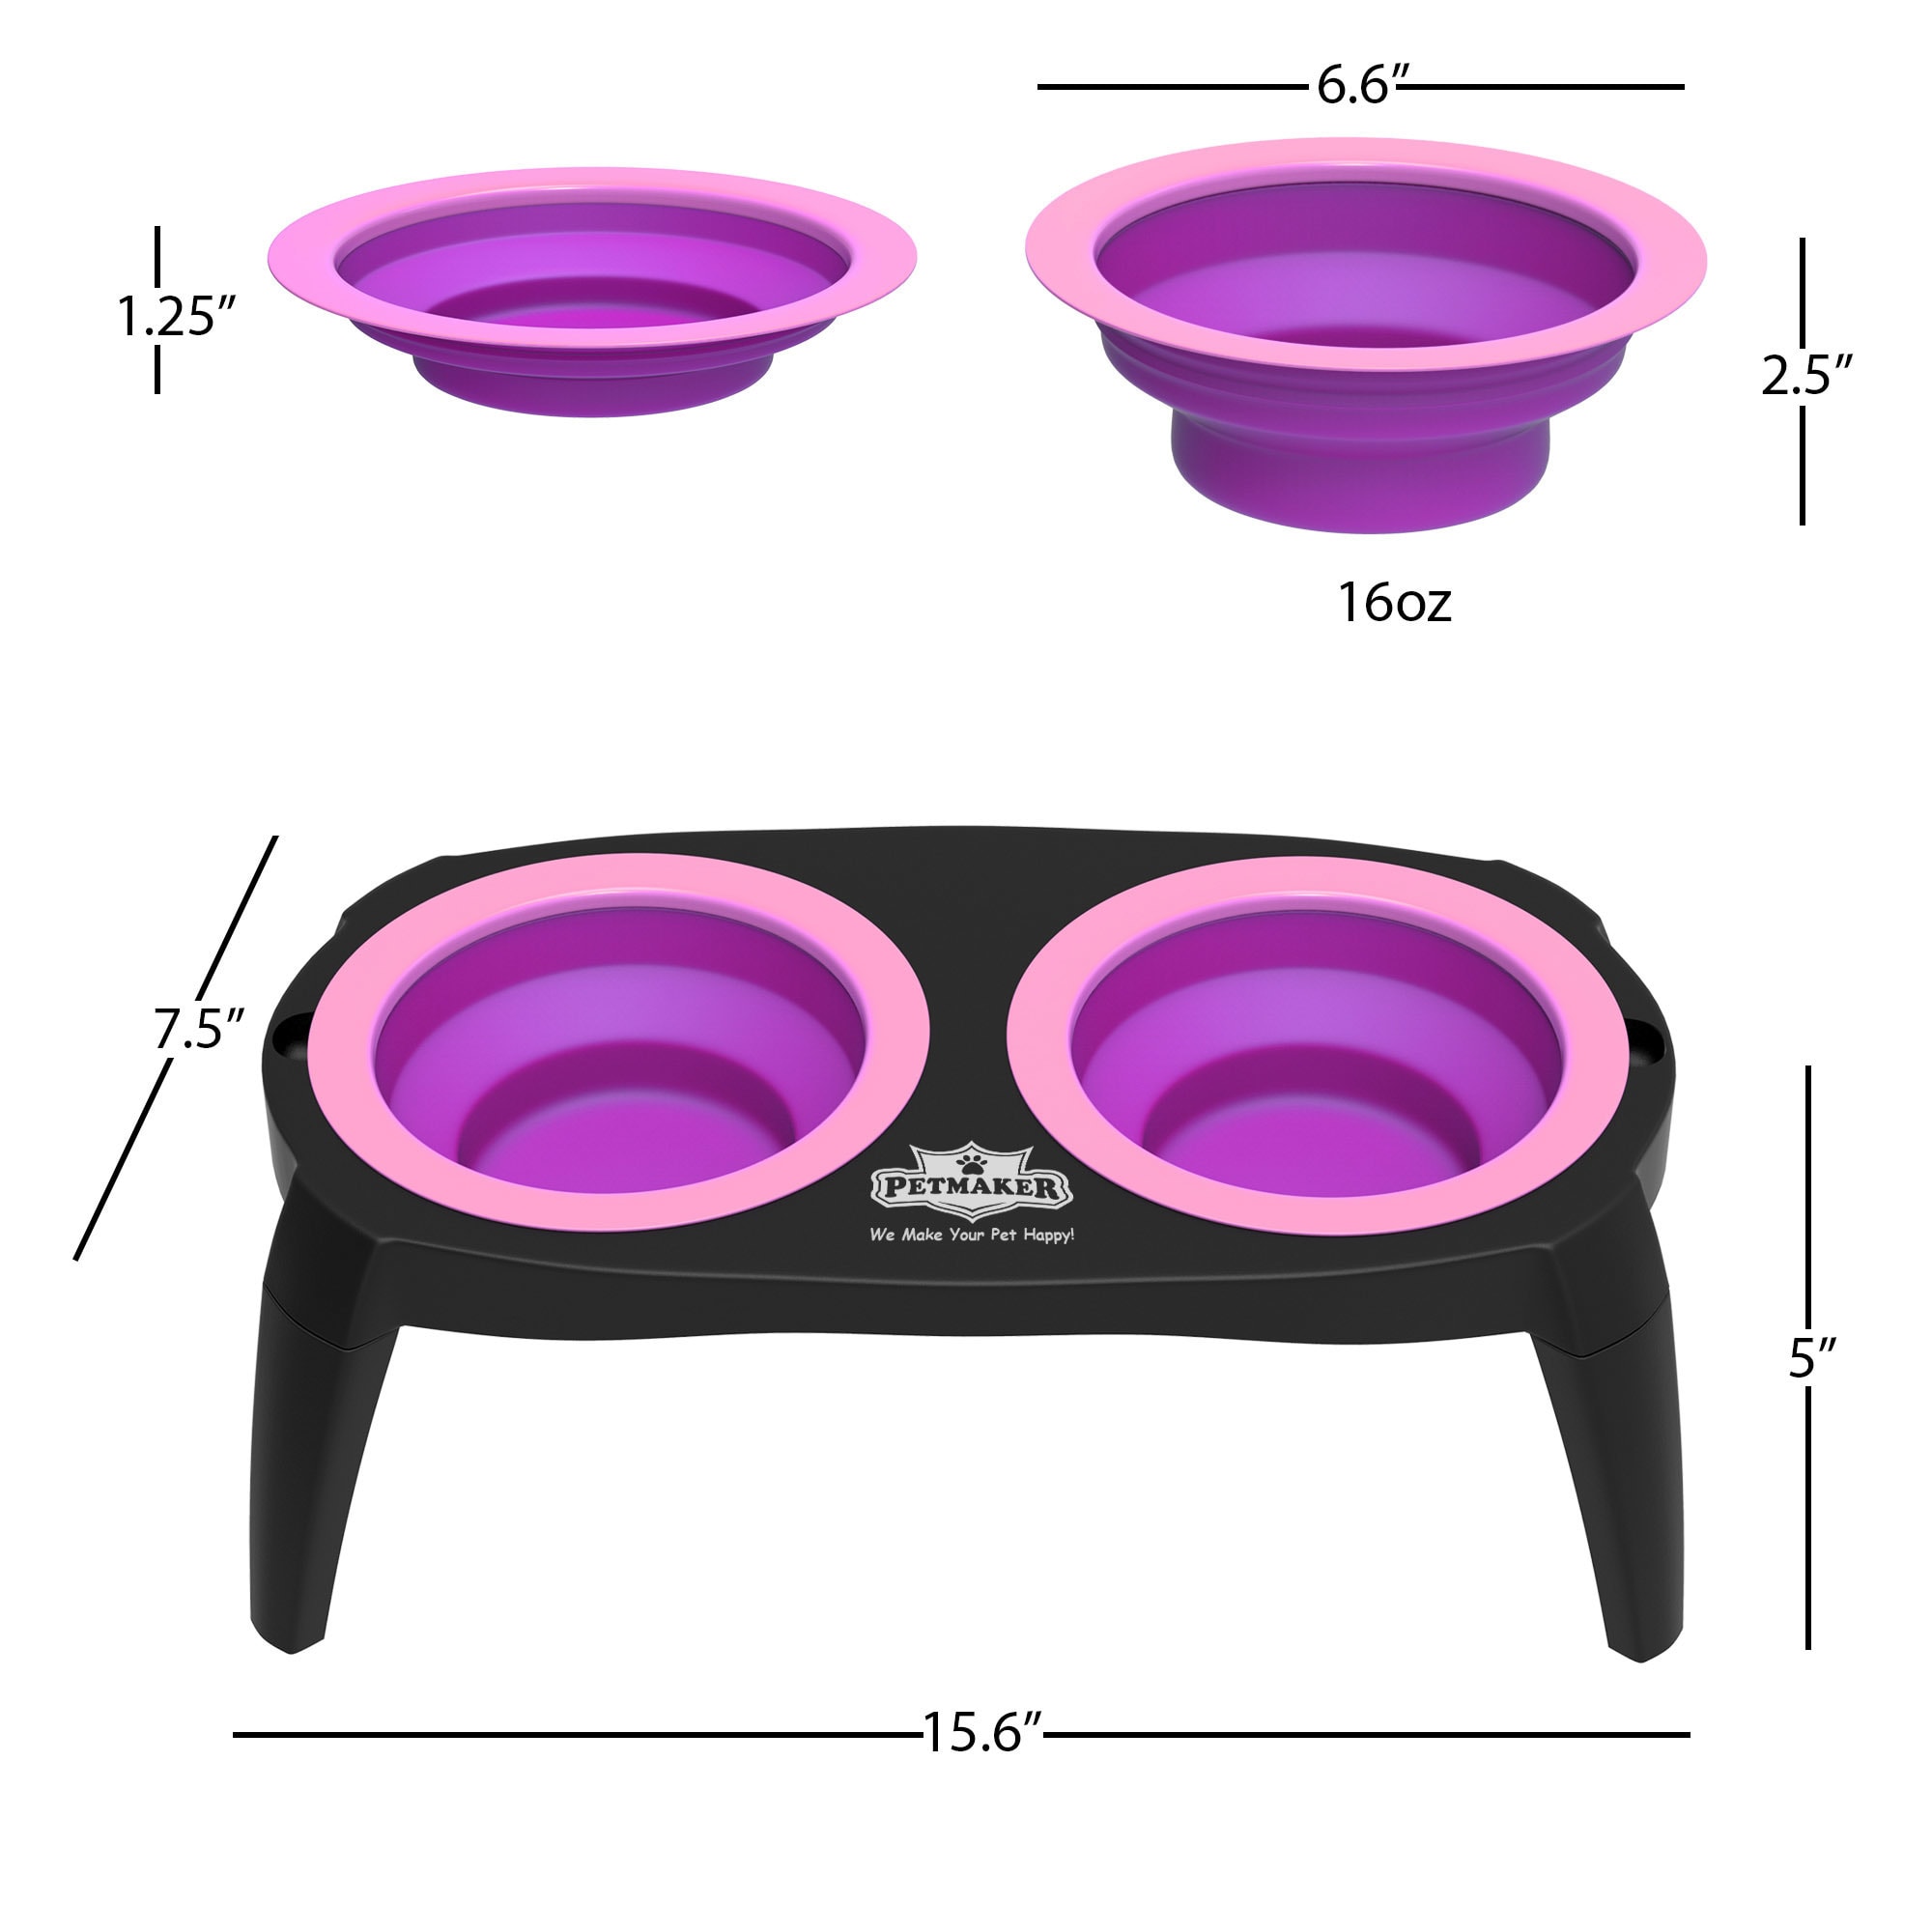 https://ak1.ostkcdn.com/images/products/20256449/Elevated-Pet-Bowls-with-Non-Slip-Stand-16-Oz-326d6a2e-6a67-4dd4-b502-edbfd7107528.jpg